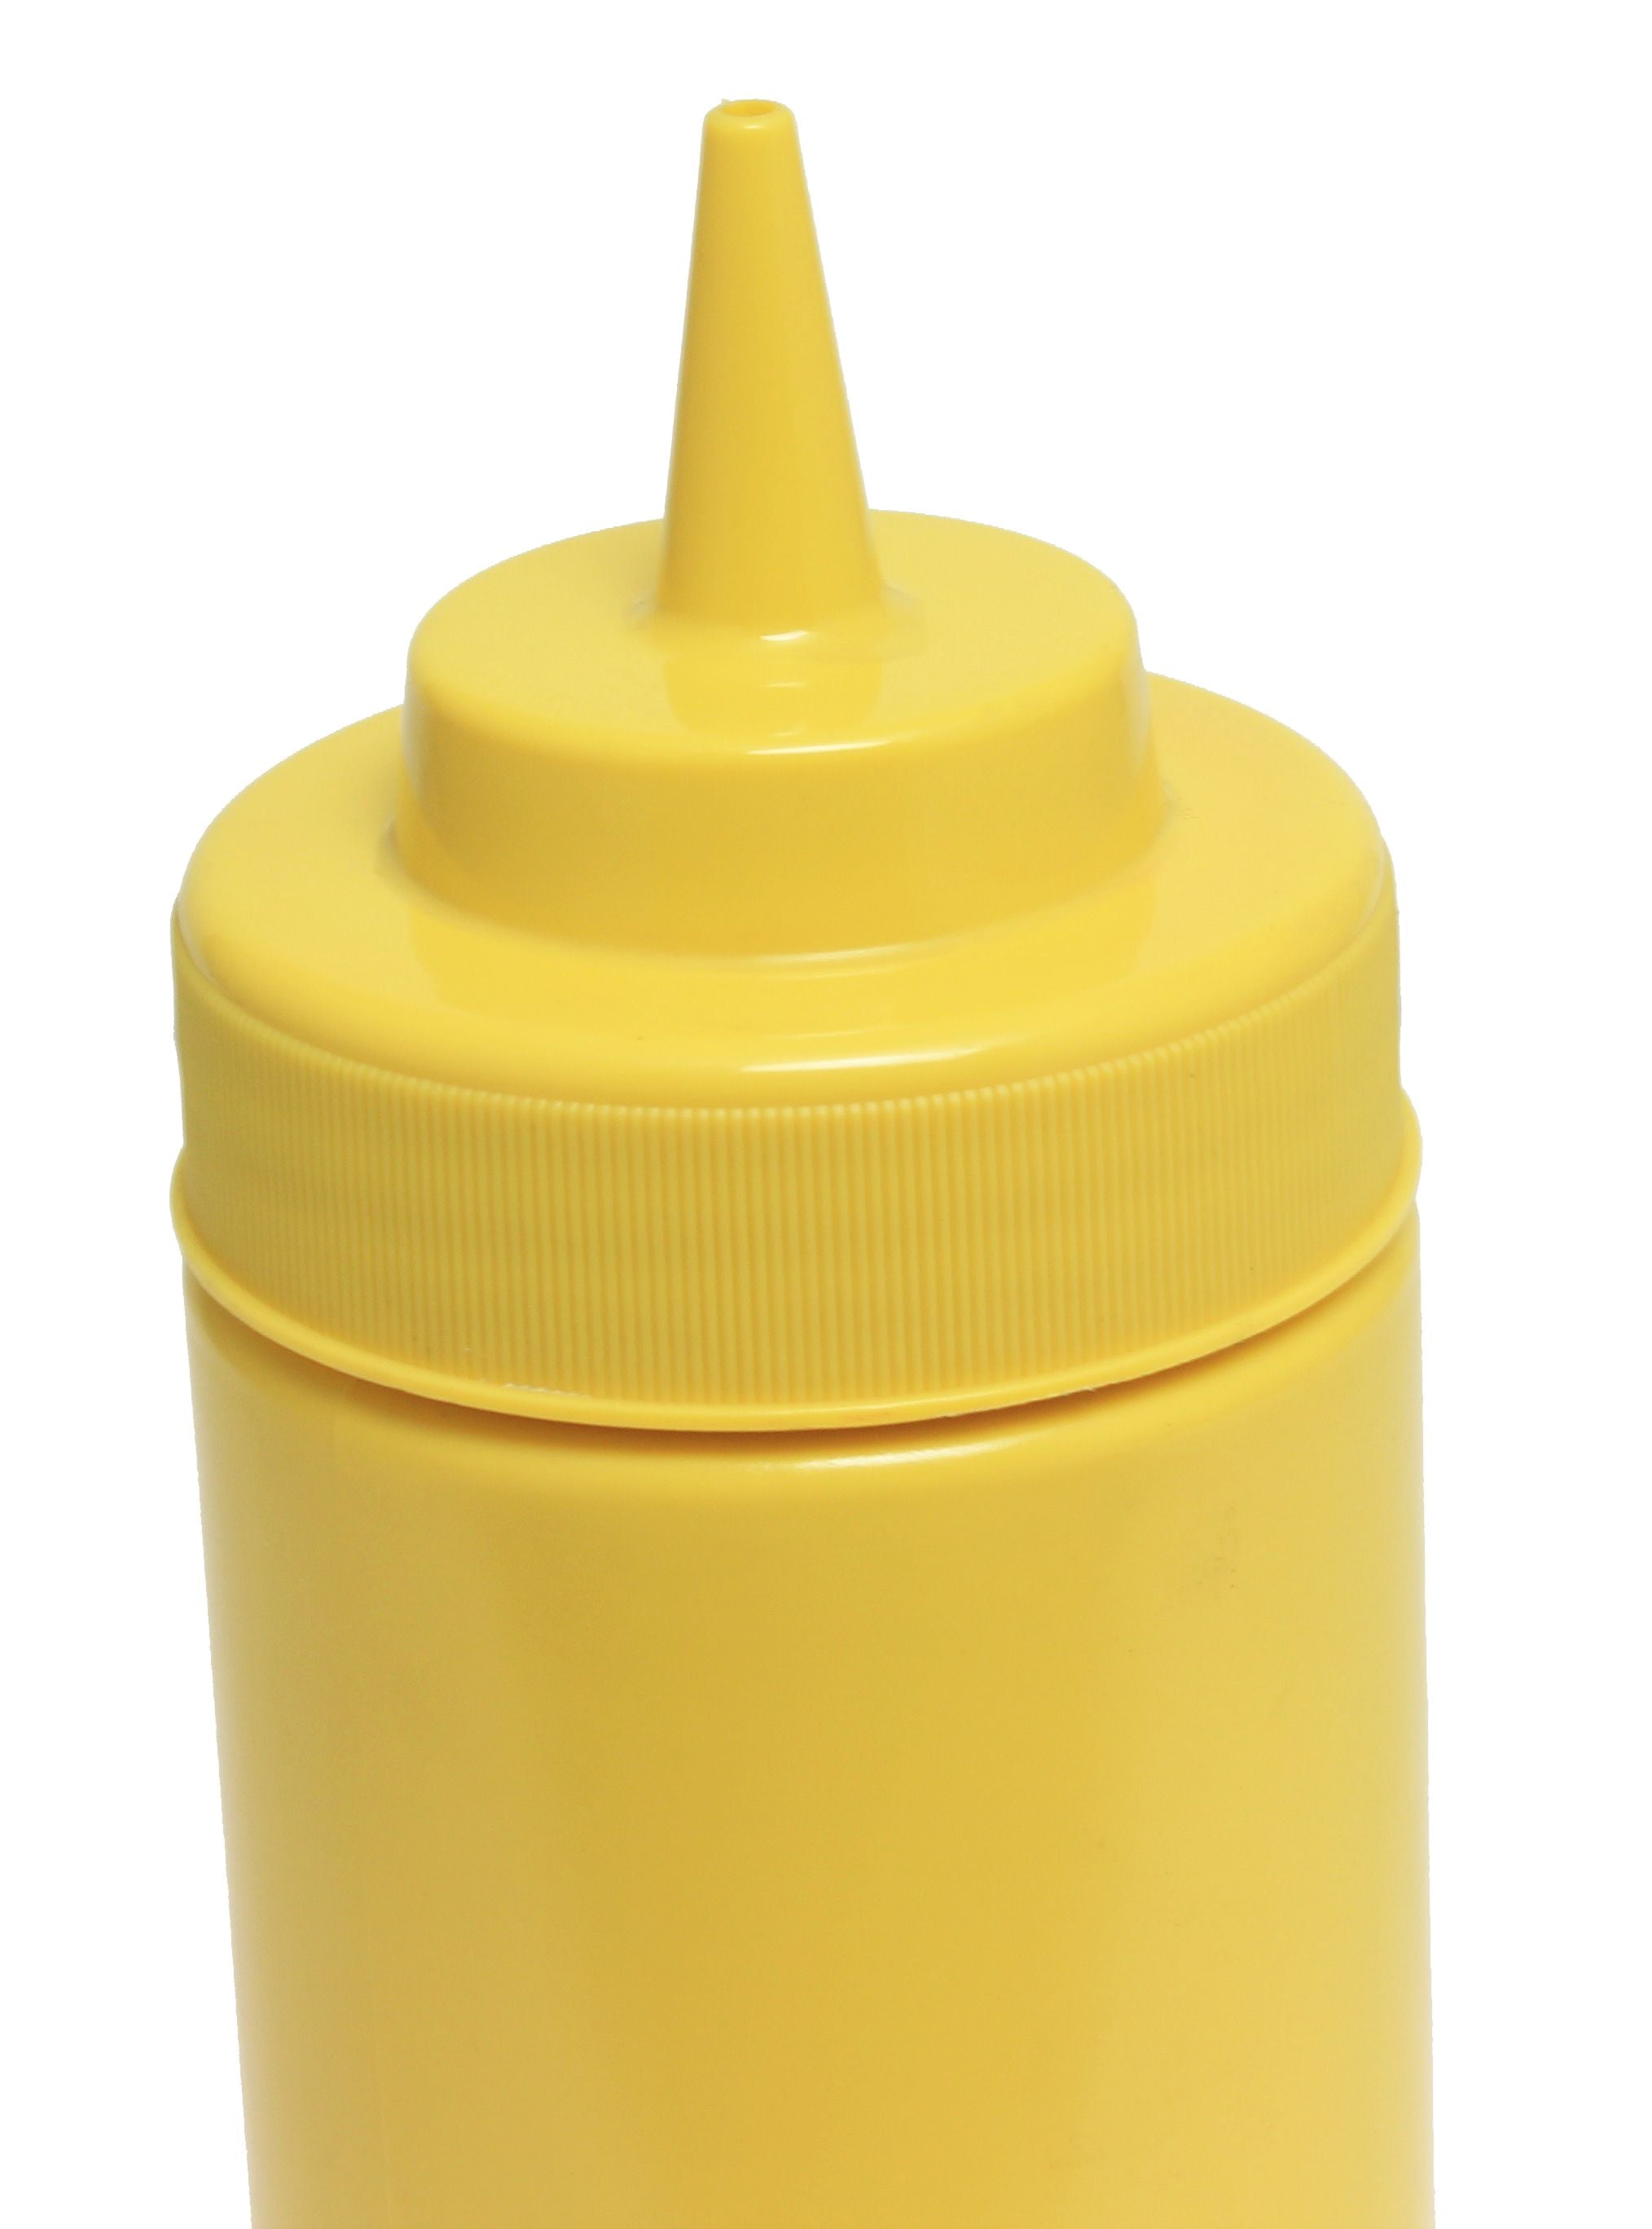 Thunder Group PLTHSB024YW 24 oz. Squeeze Bottle Yellow - 6/Pack